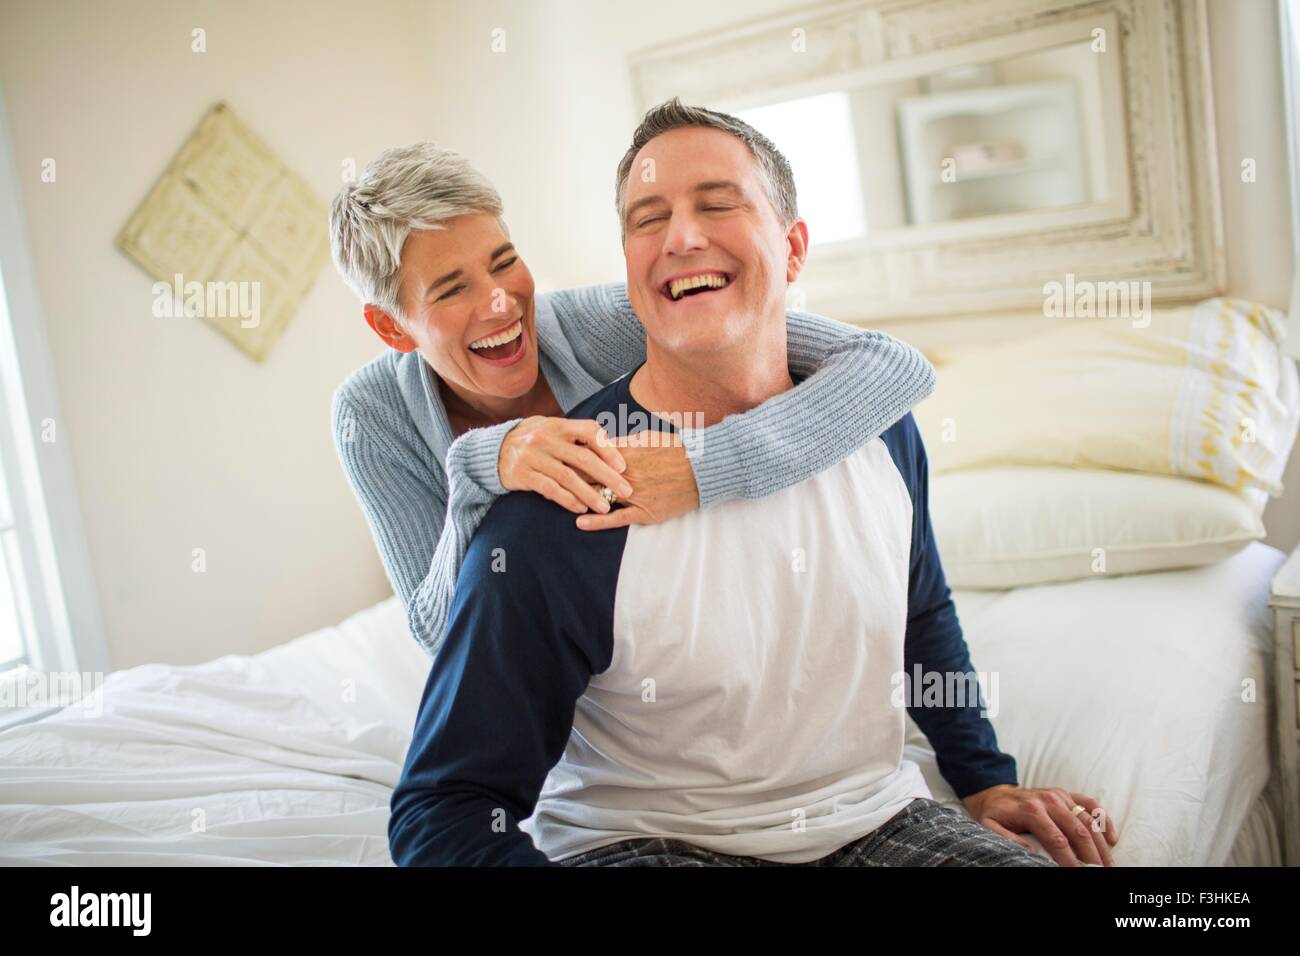 Mature couple laughing and fooling around on bed Stock Photo